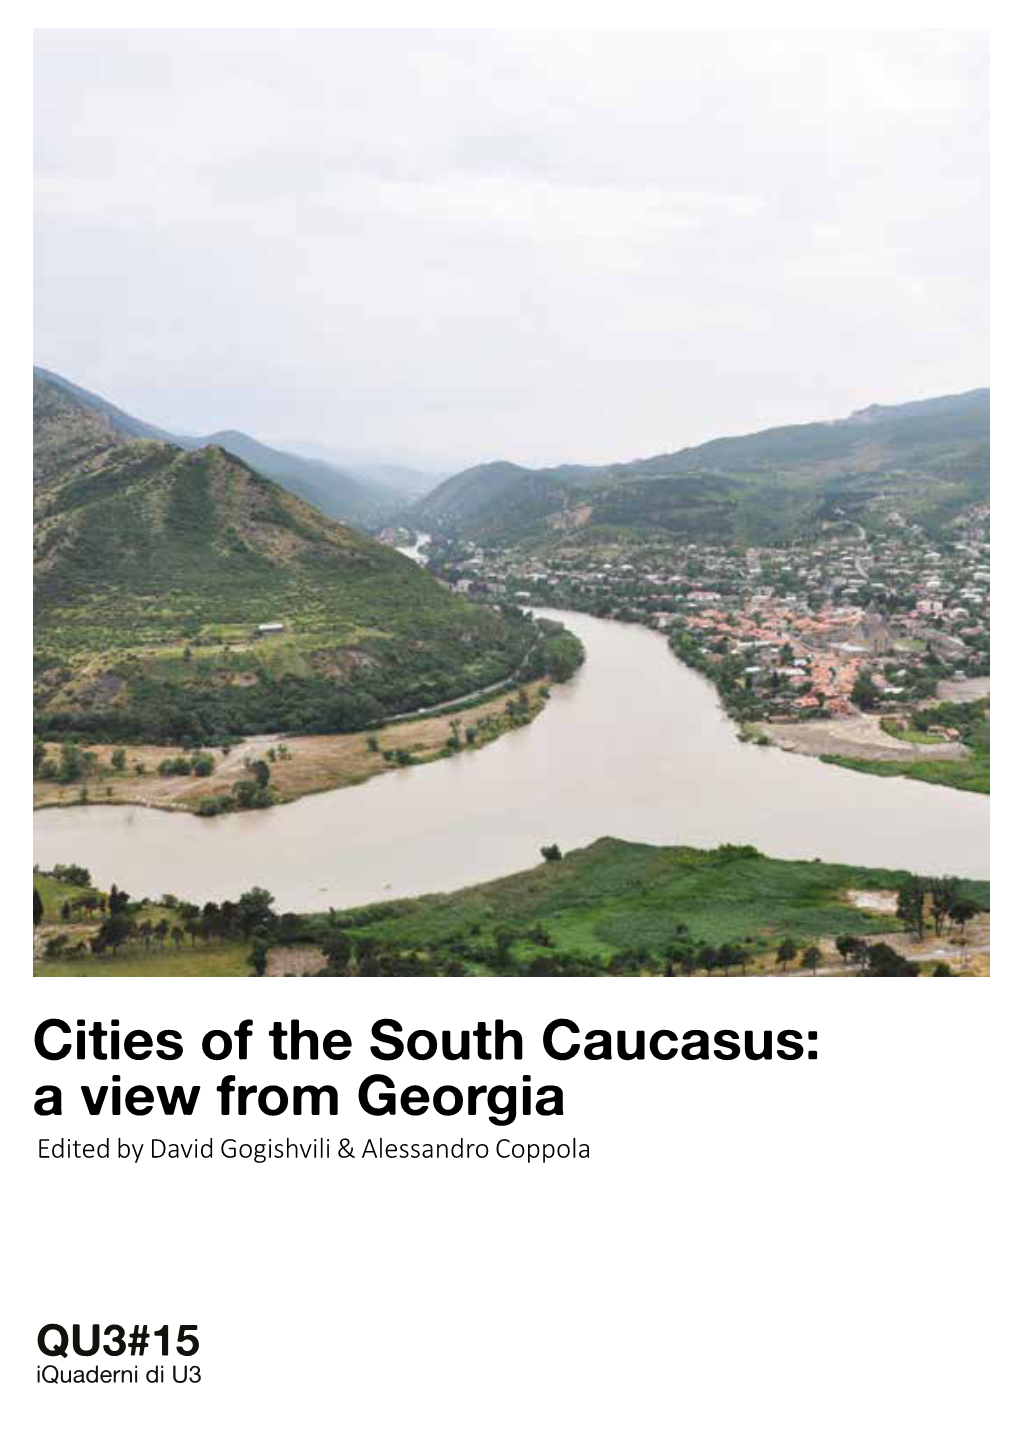 Cities of the South Caucasus: a View from Georgia Edited by David Gogishvili & Alessandro Coppola